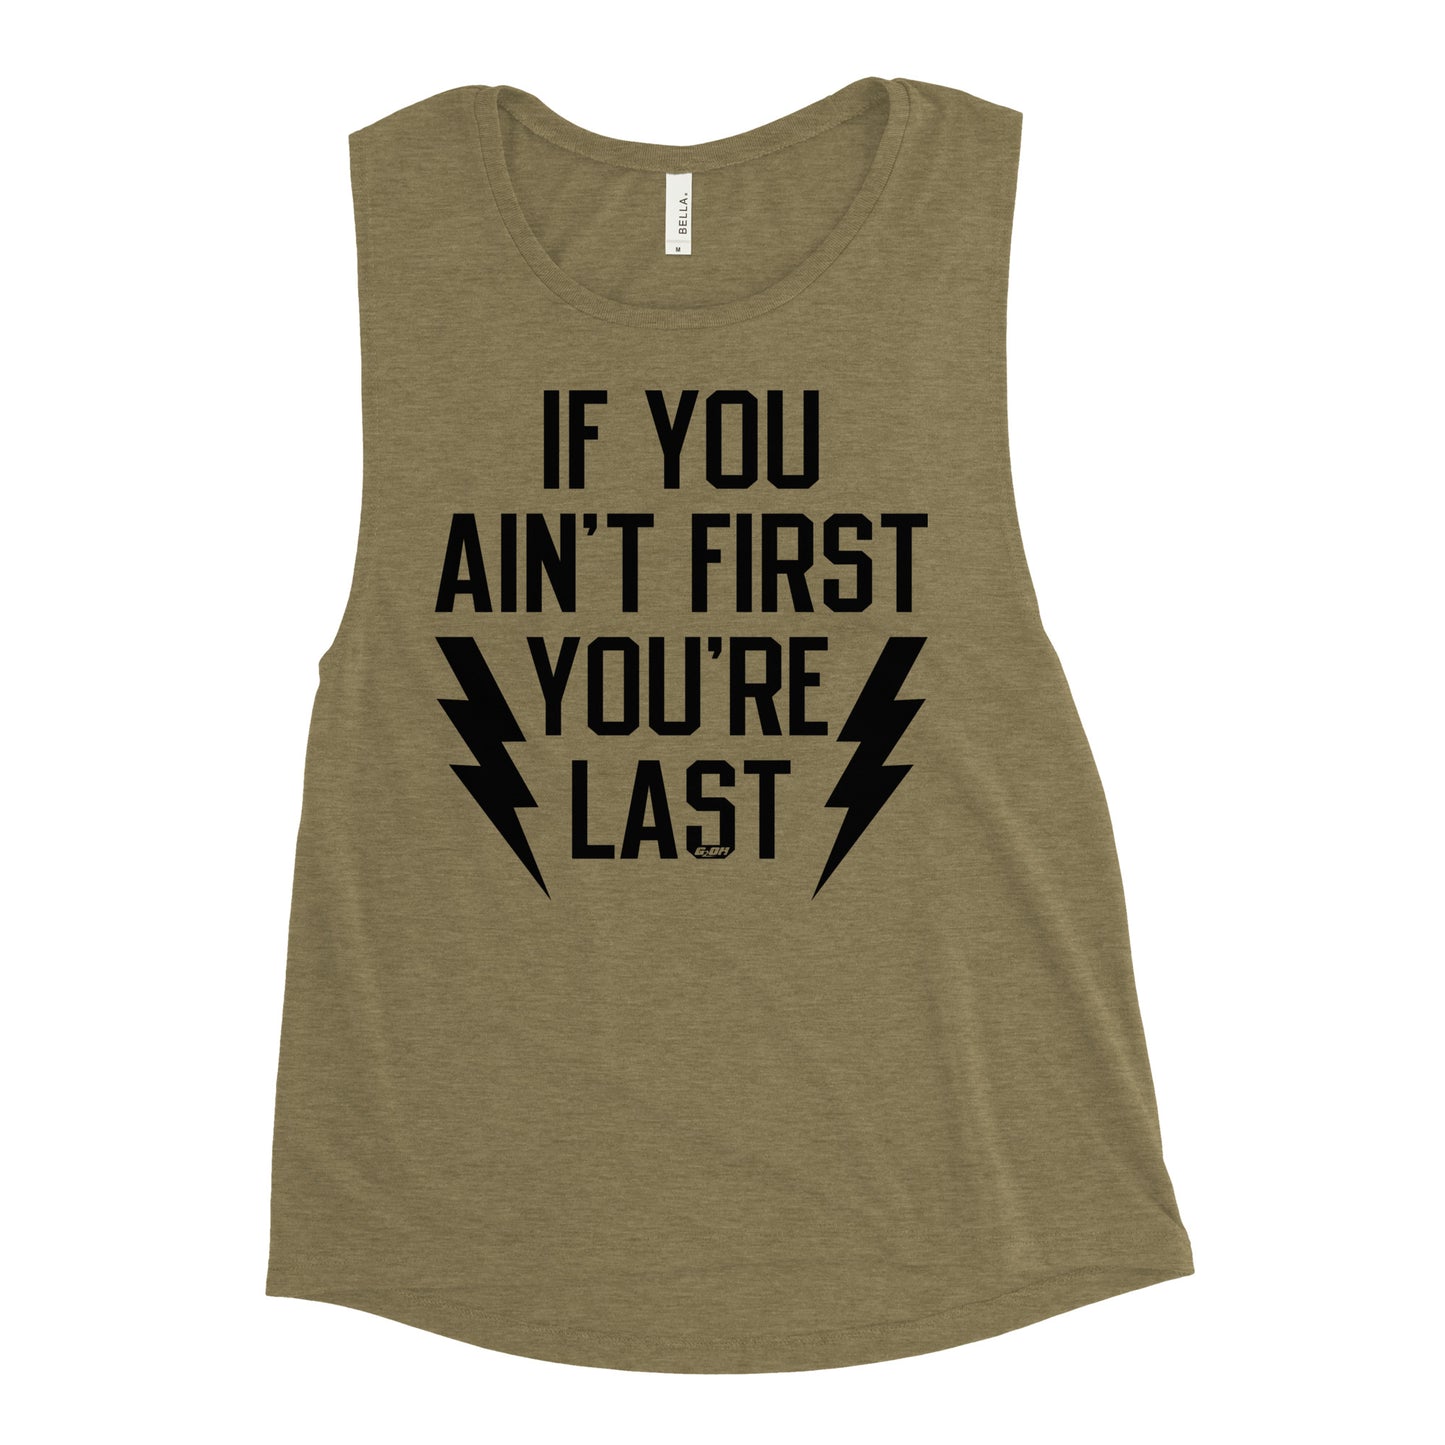 If You Ain't First You're Last Women's Muscle Tank